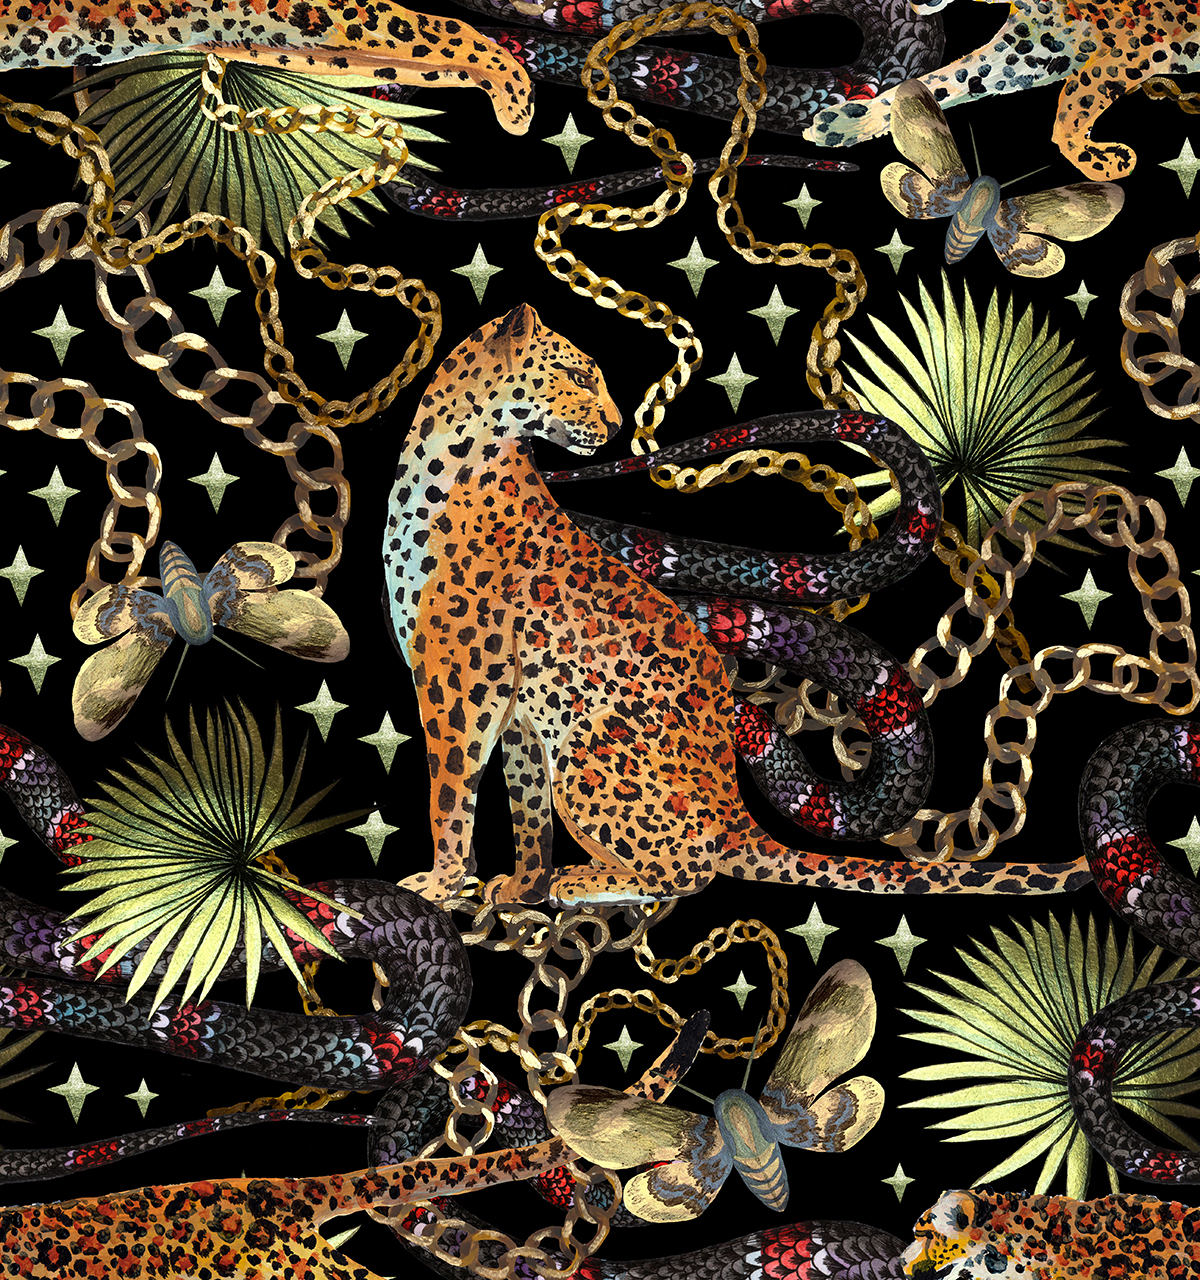 A pattern of snakes and a leopard